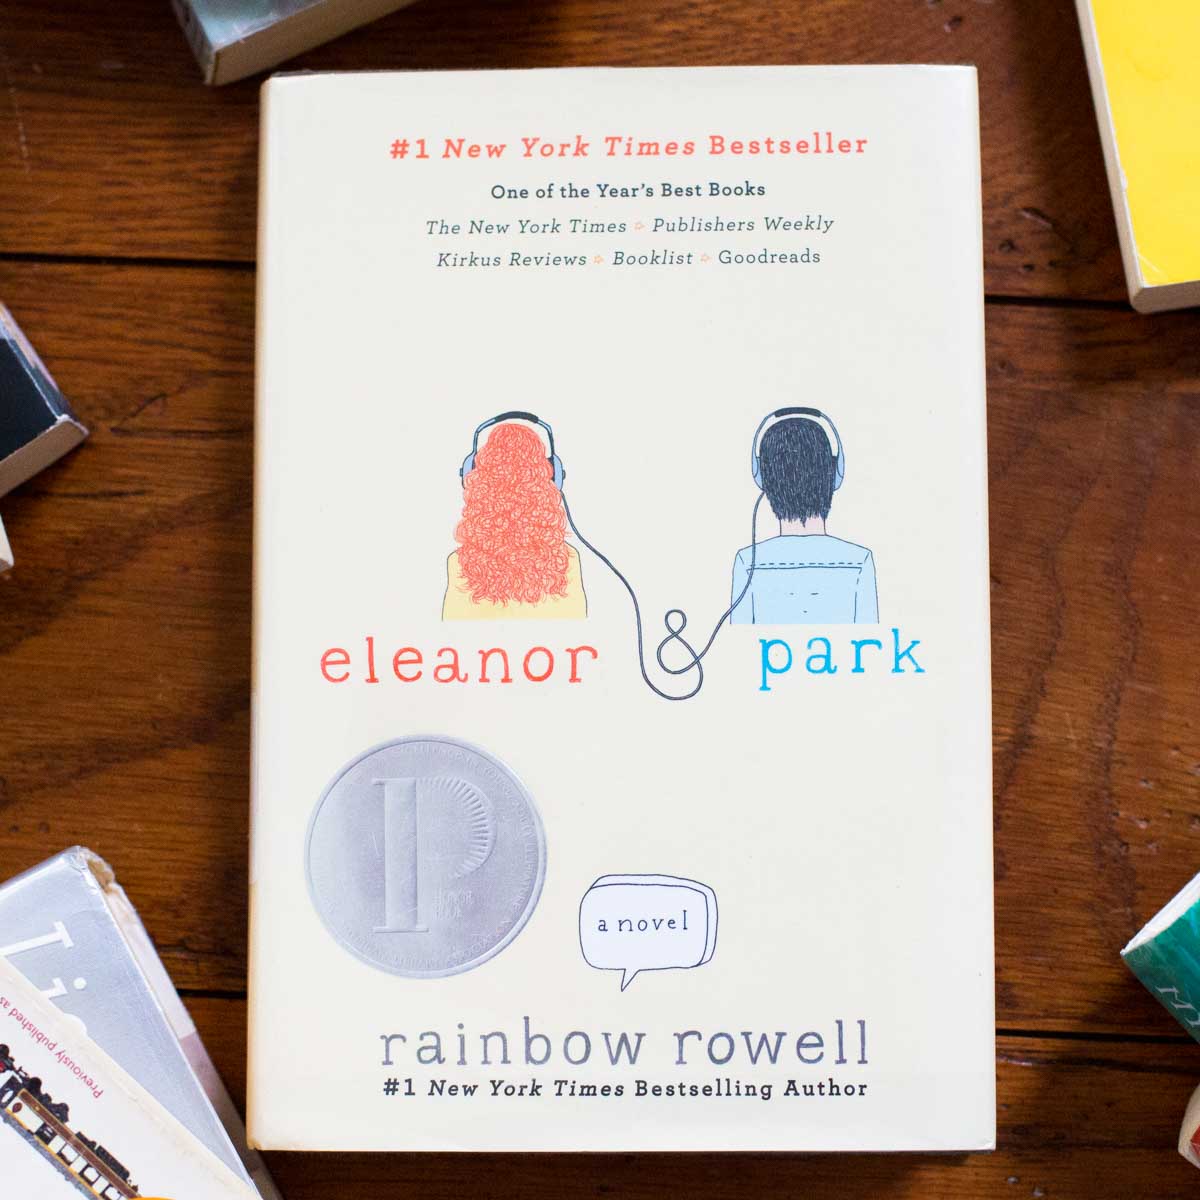 A copy of Eleanor & Park sits on a table.